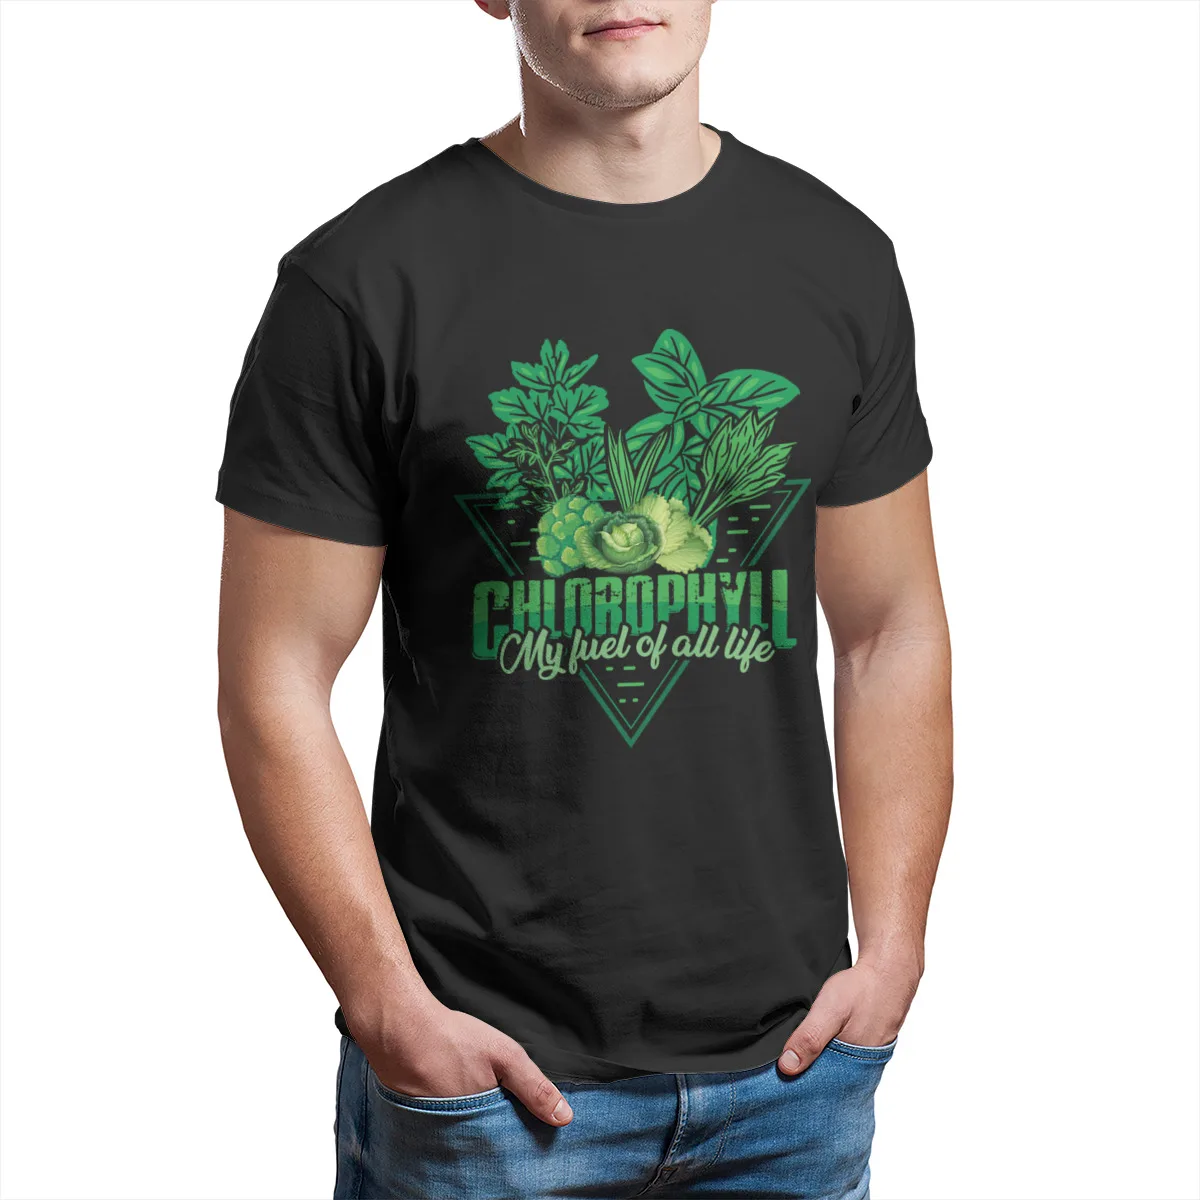 

Chlorophyll Leafy Greens Vegetables Herbs Leaves Vegan Essentials Fashion Funny 100% Casual loose Cotton color Tshirts 138124